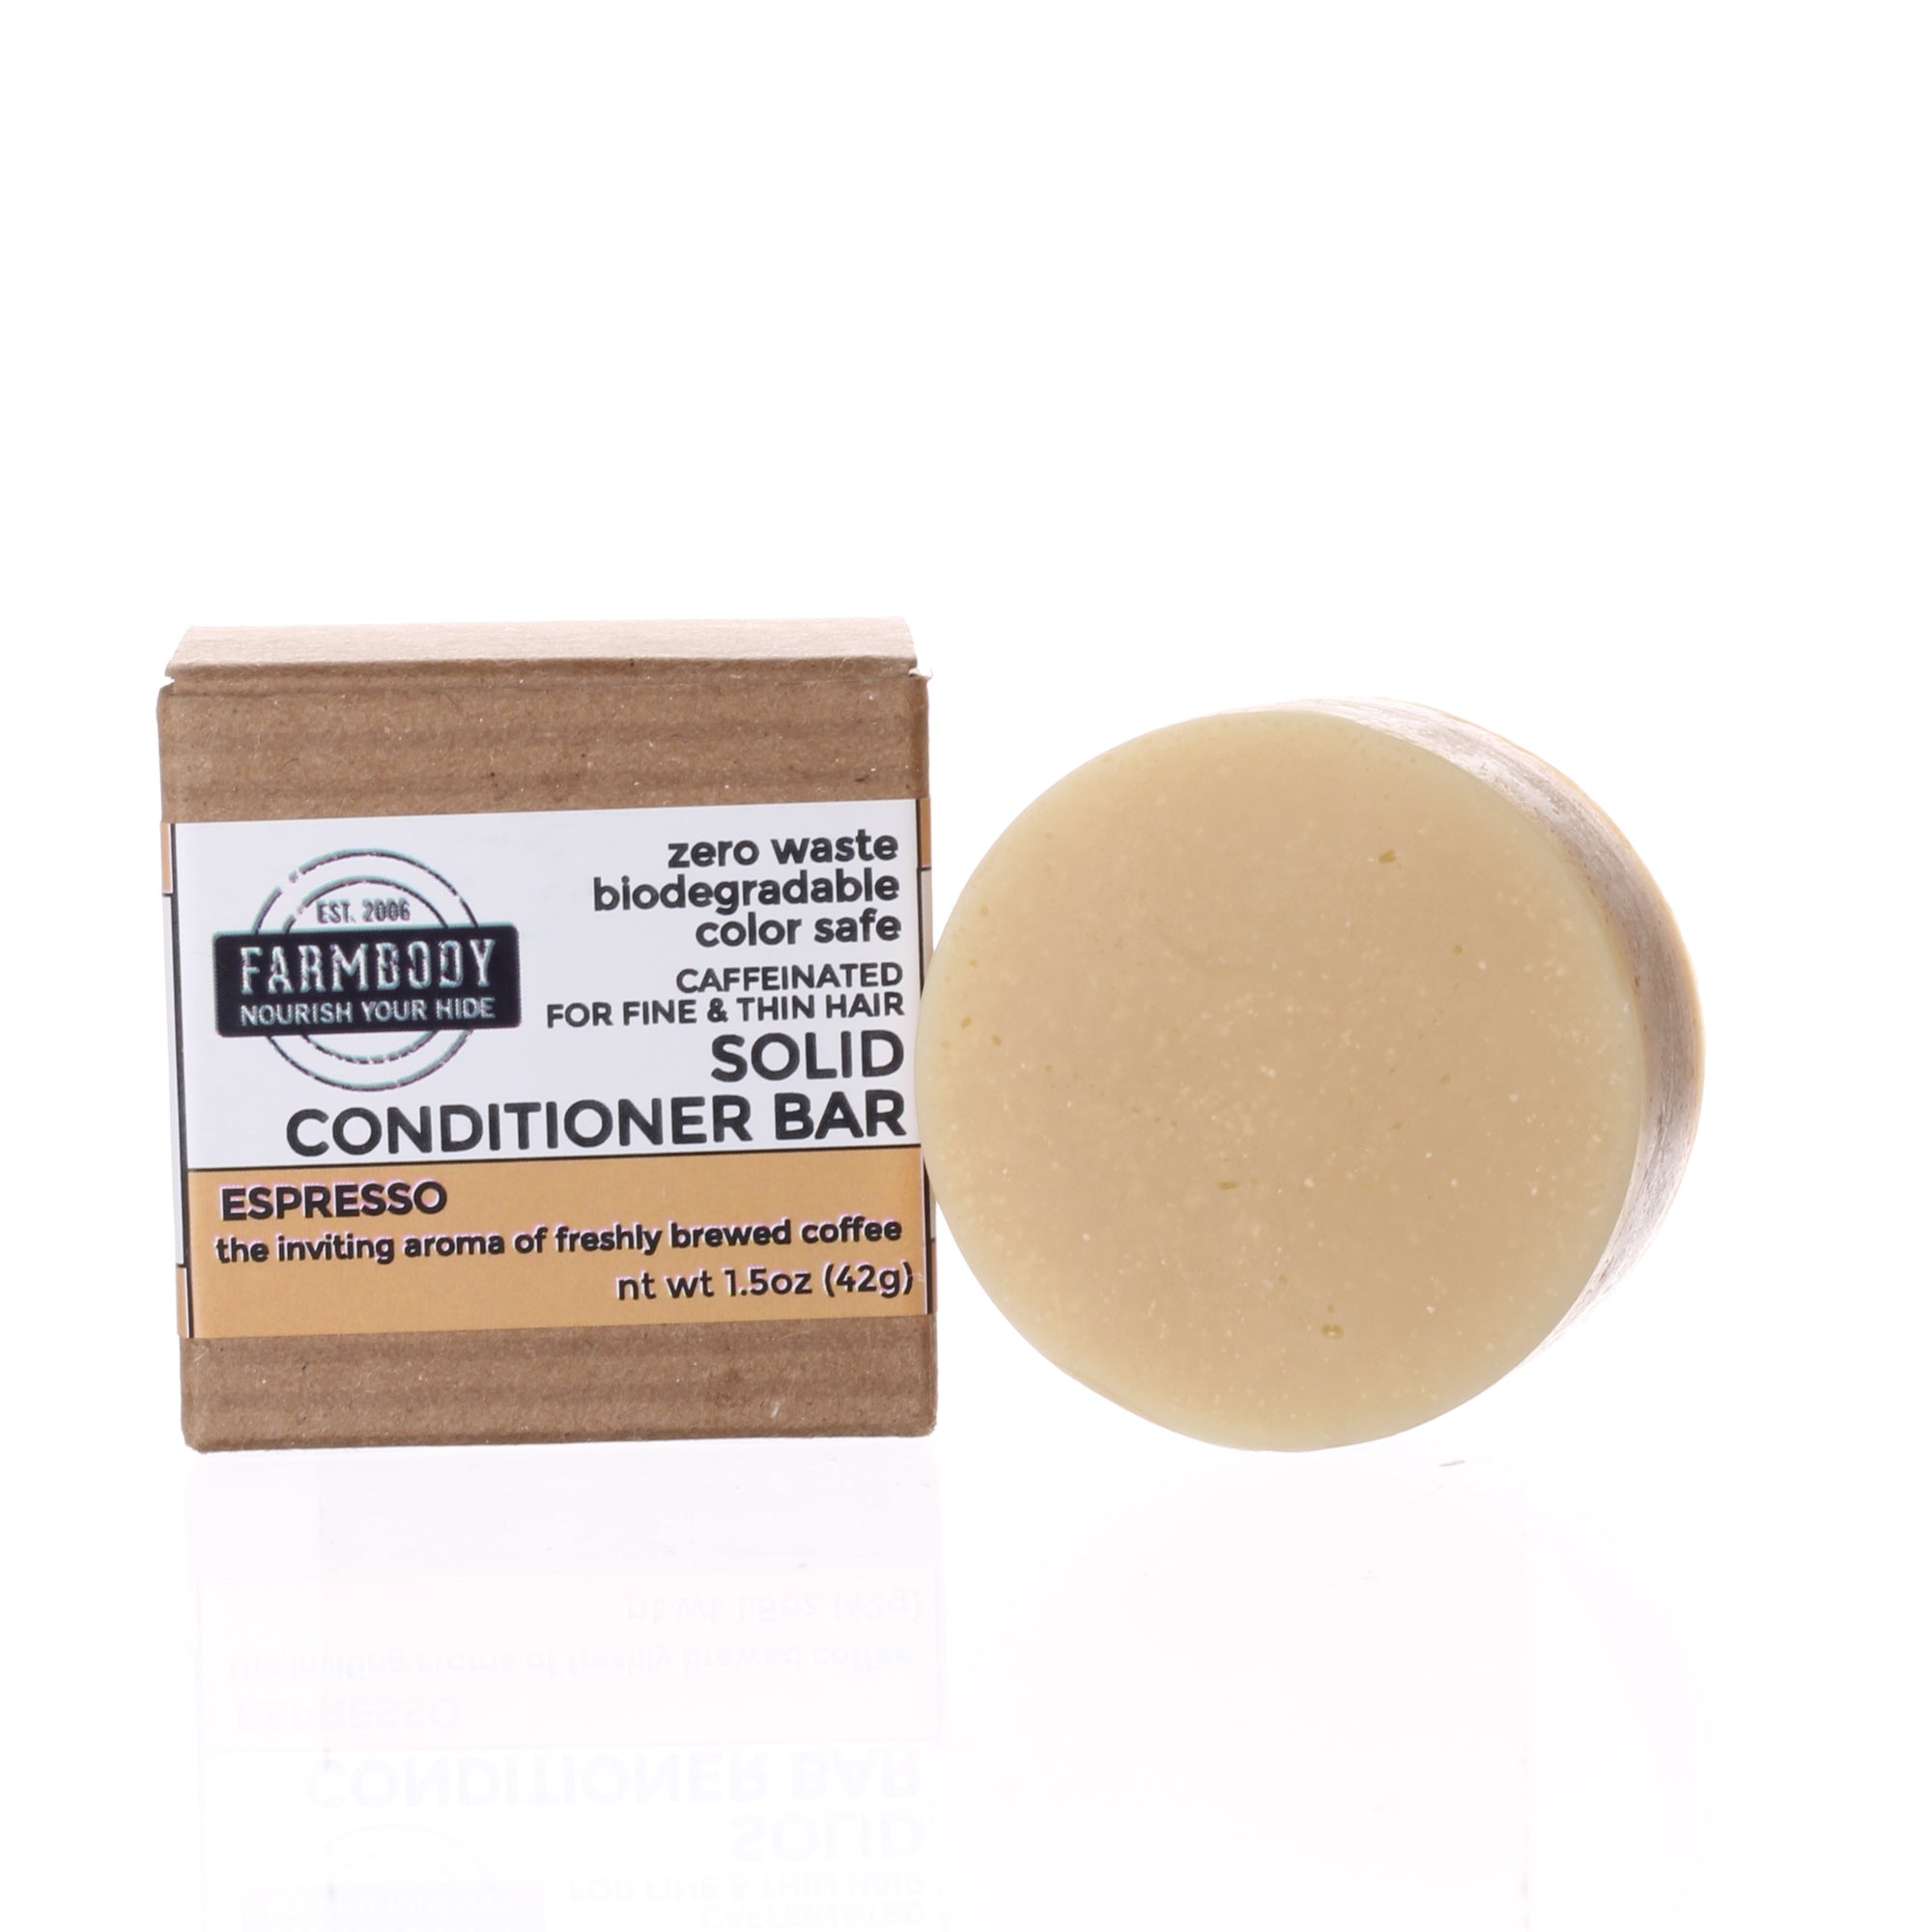 Farmbody Caffeinated Solid Conditioner Bar for Fast Hair Growth for thin hair for fine hair